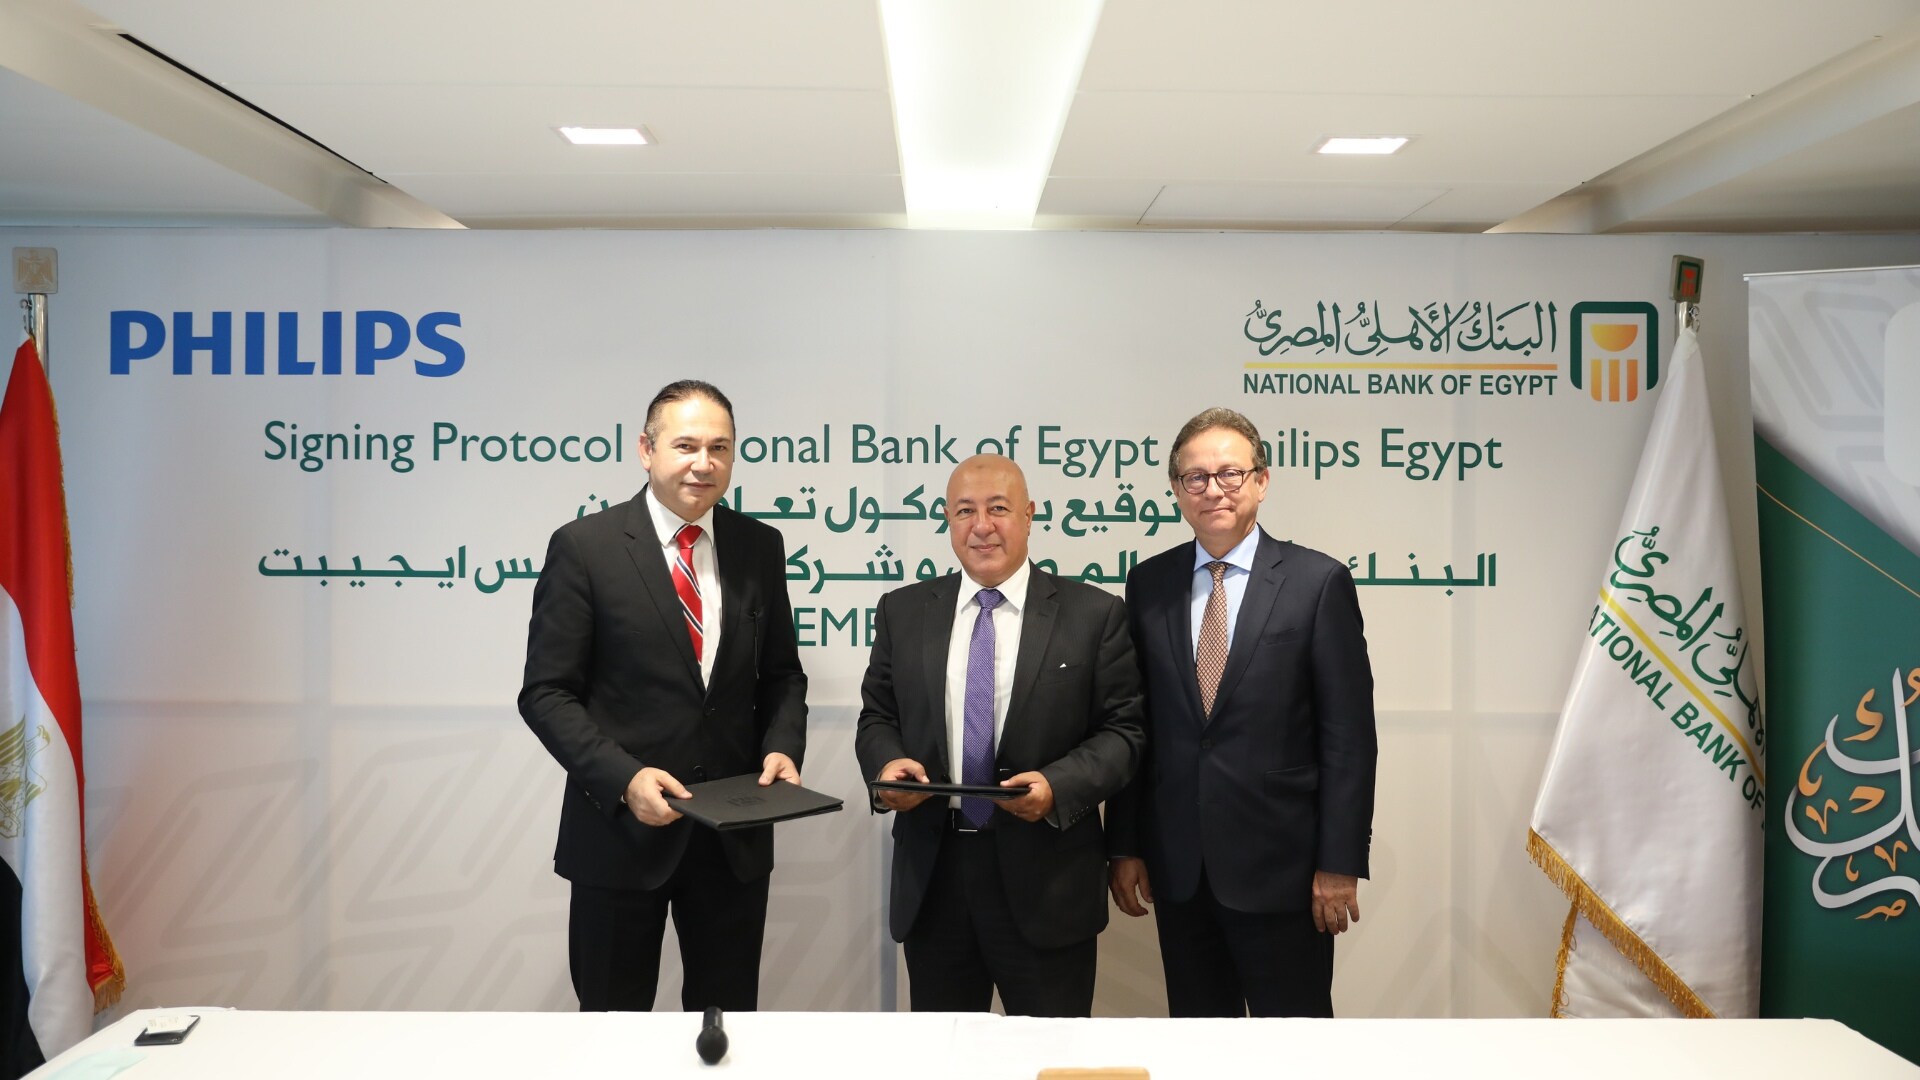 Philips signs collaboration protocol with National Bank of Egypt to provide access to financing for medical equipment